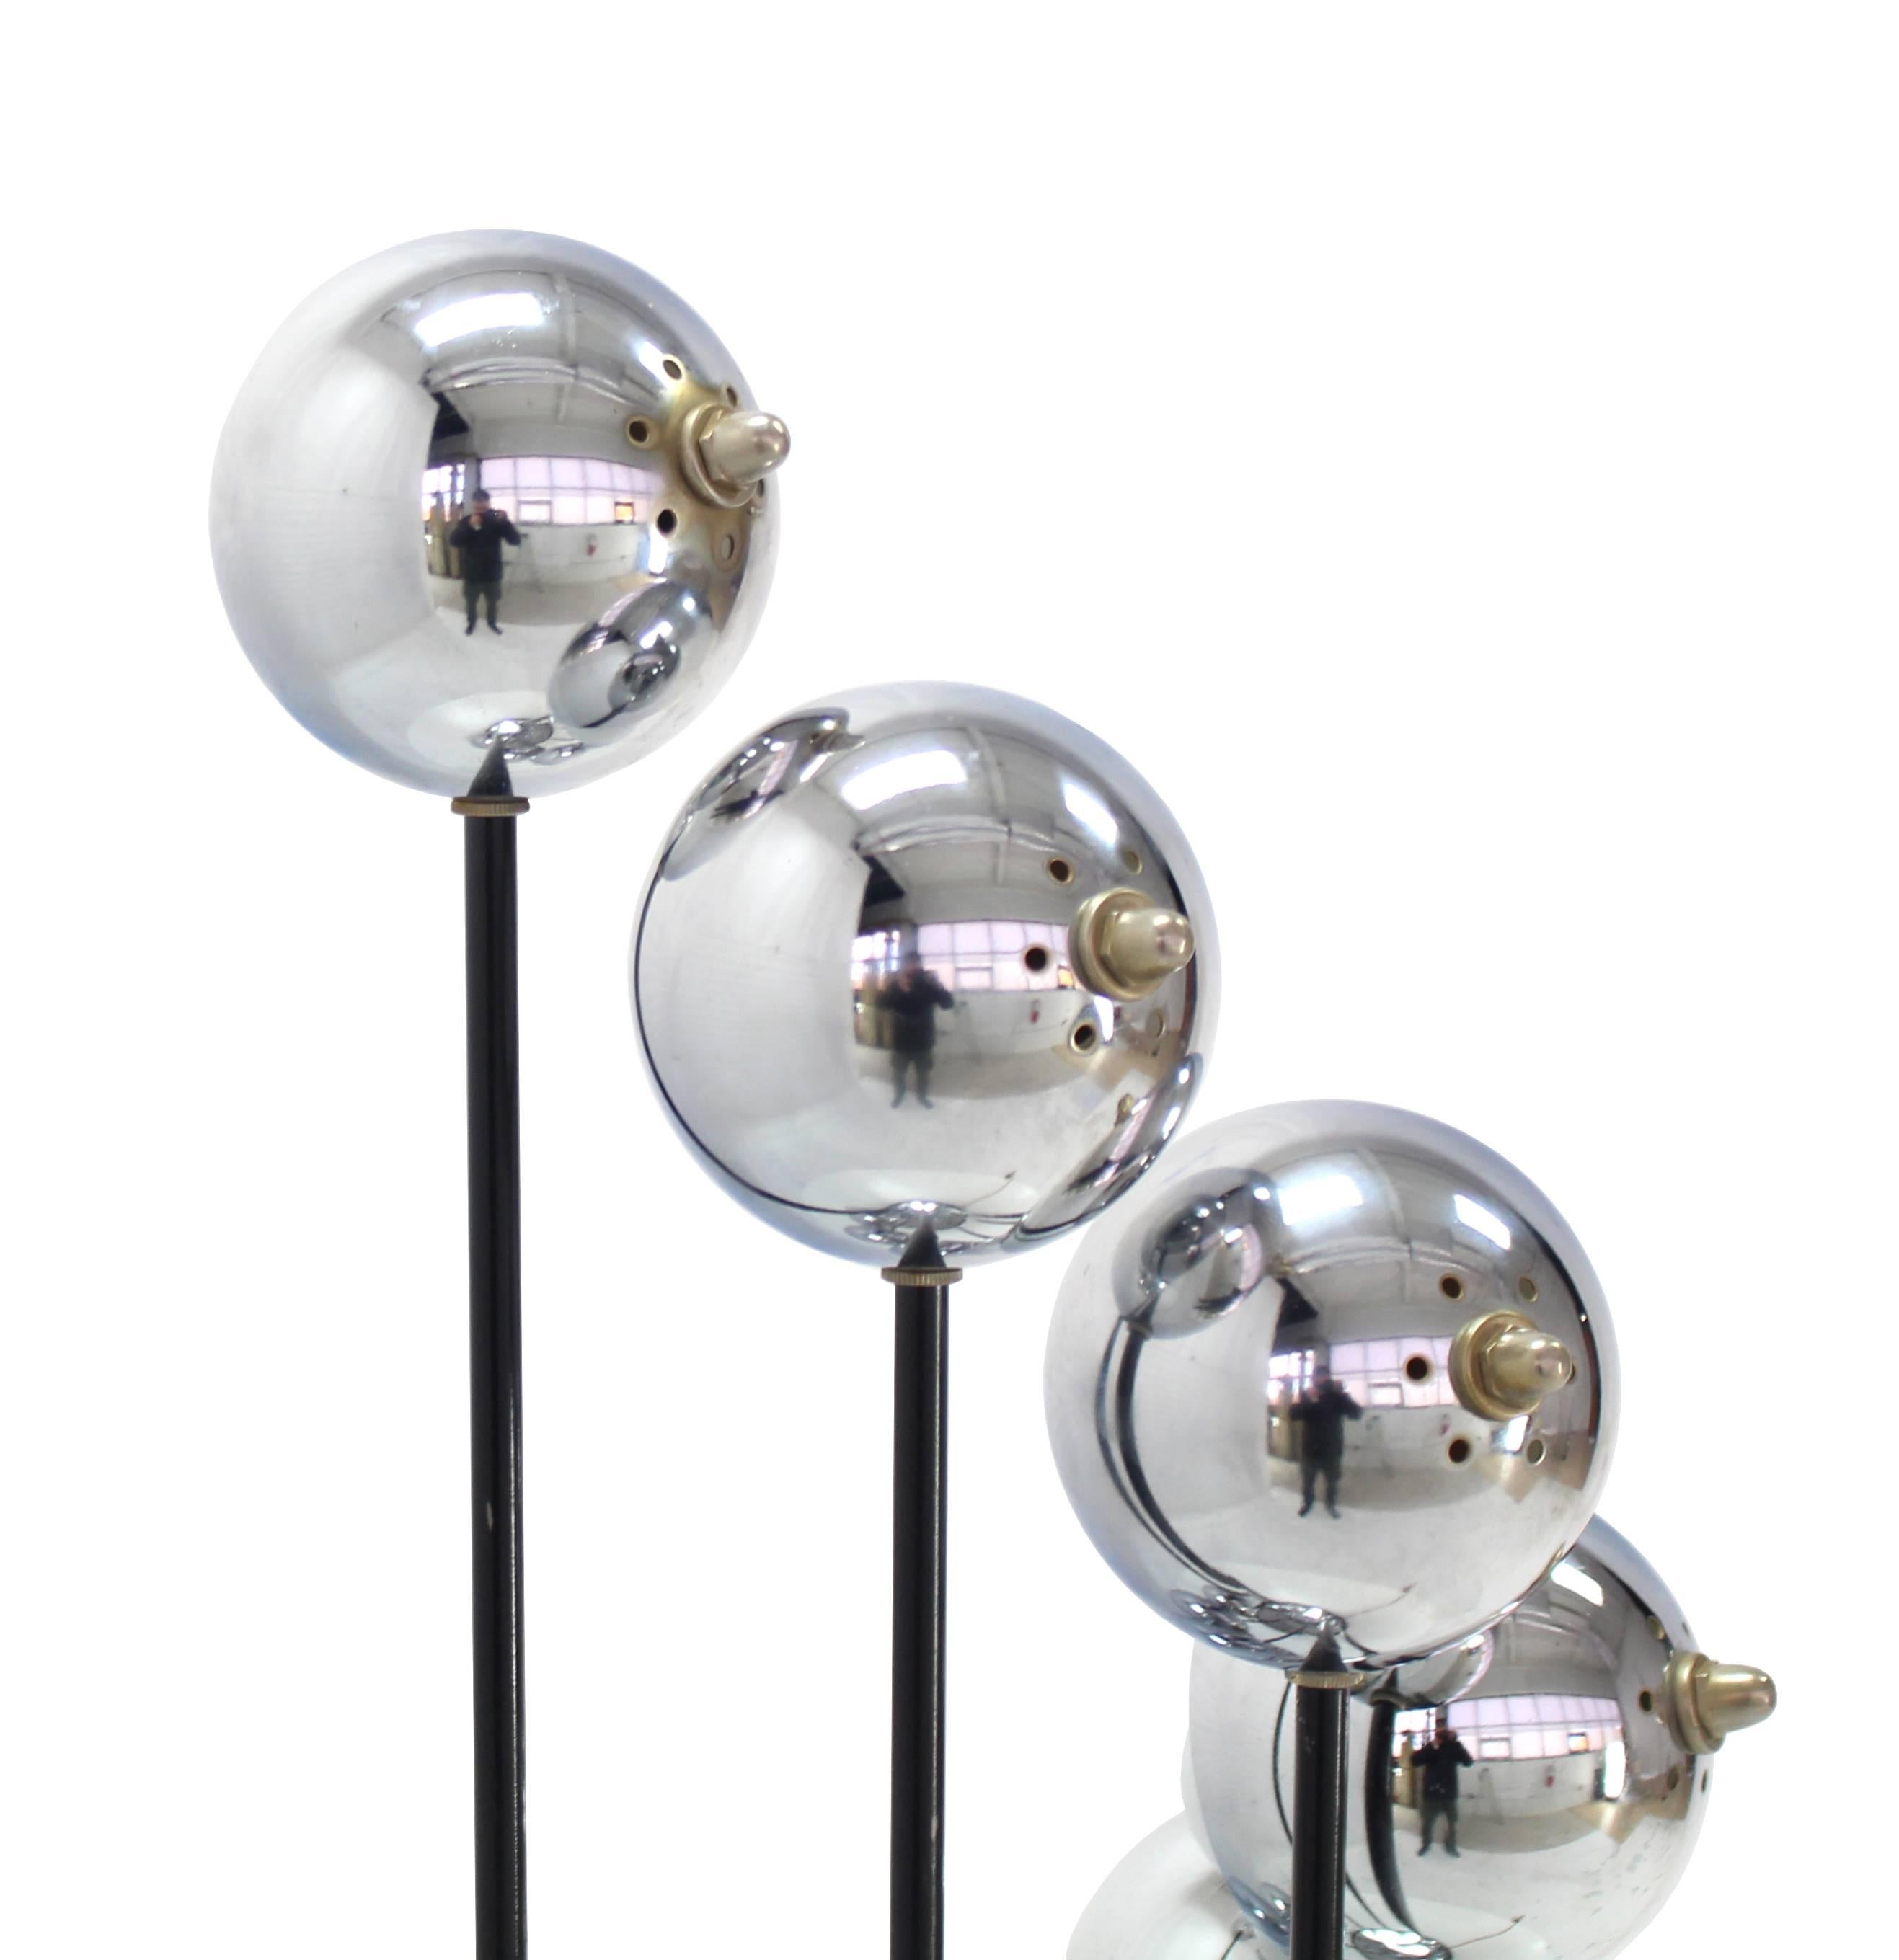 Mid-Century Modern Chrome Globe Table Lamps In Excellent Condition For Sale In Rockaway, NJ